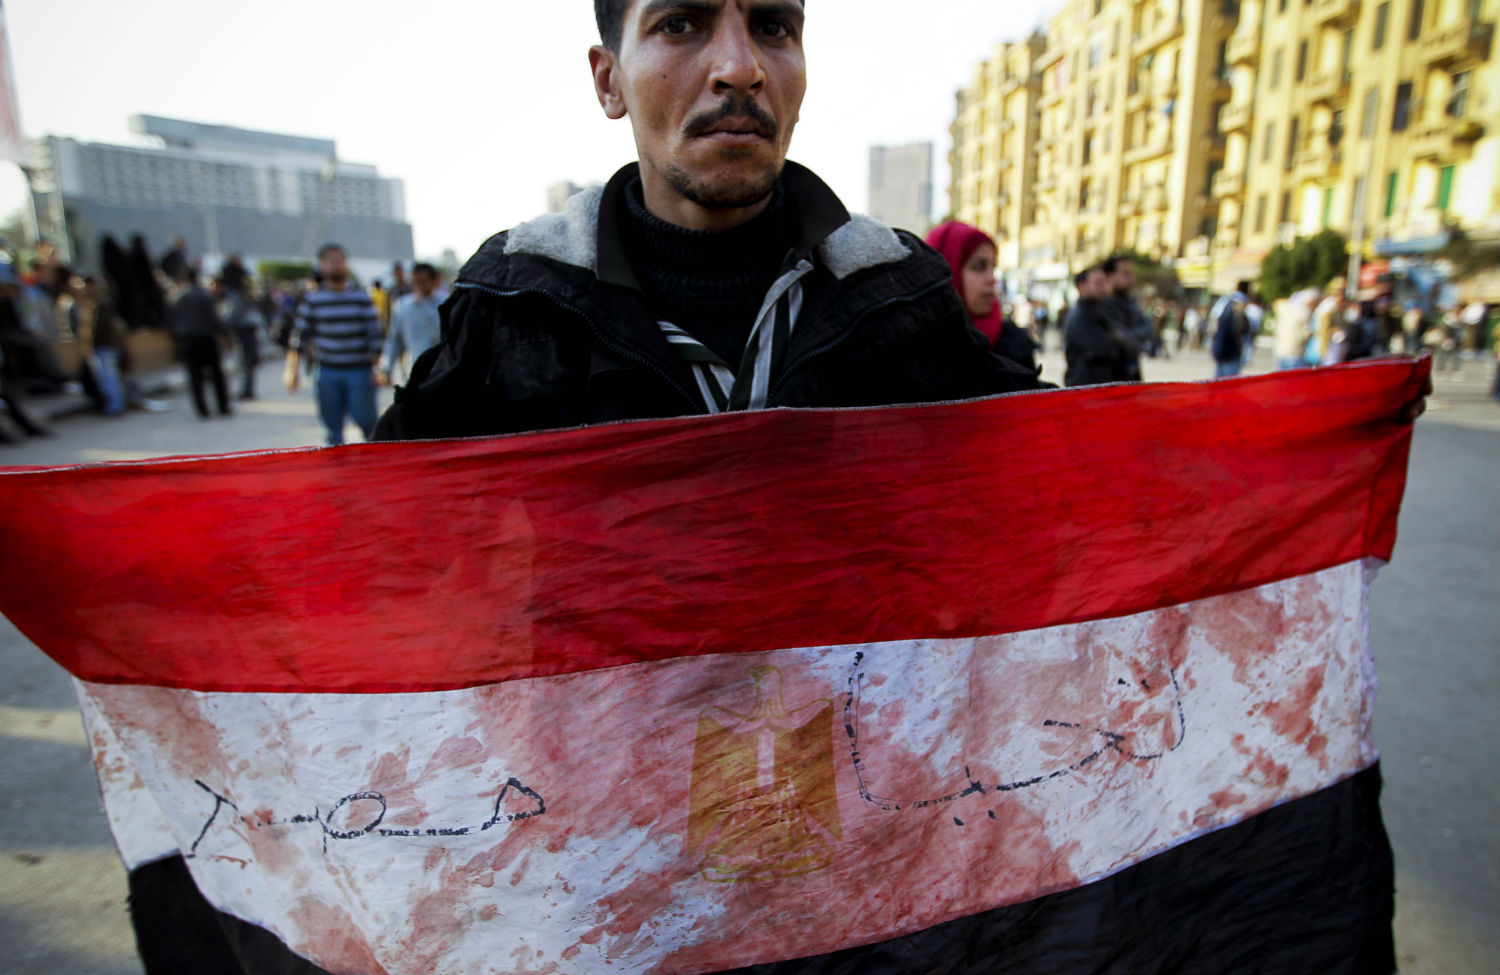 Egypt Escalates Repression Against Human Rights Groups and NGOs